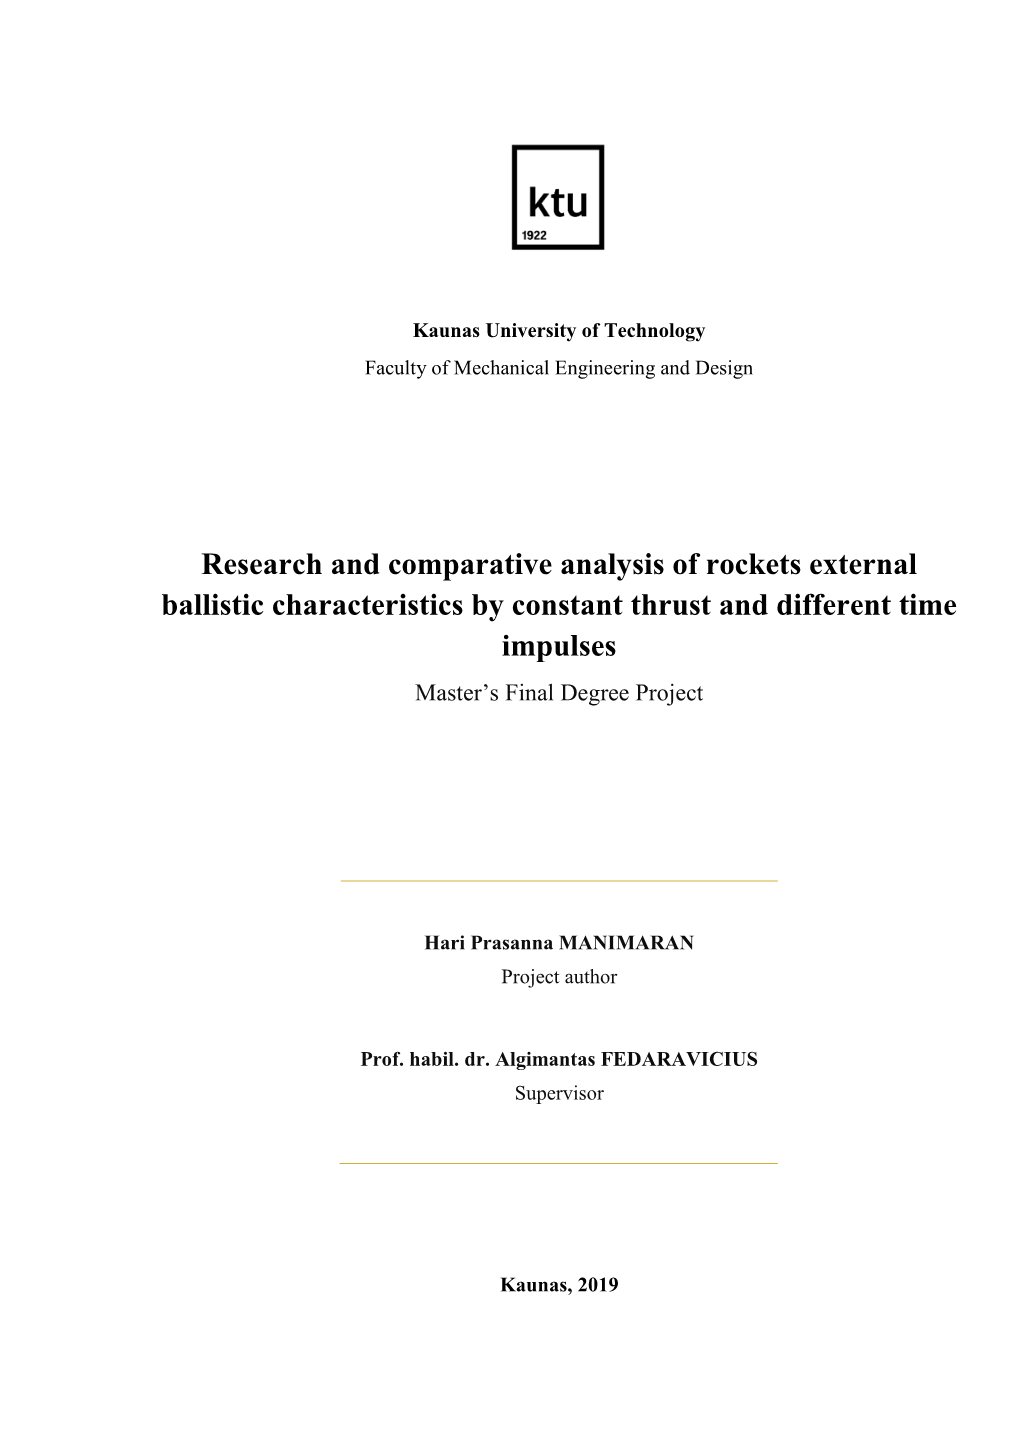 Research and Comparative Analysis of Rockets External Ballistic Characteristics by Constant Thrust and Different Time Impulses Master’S Final Degree Project